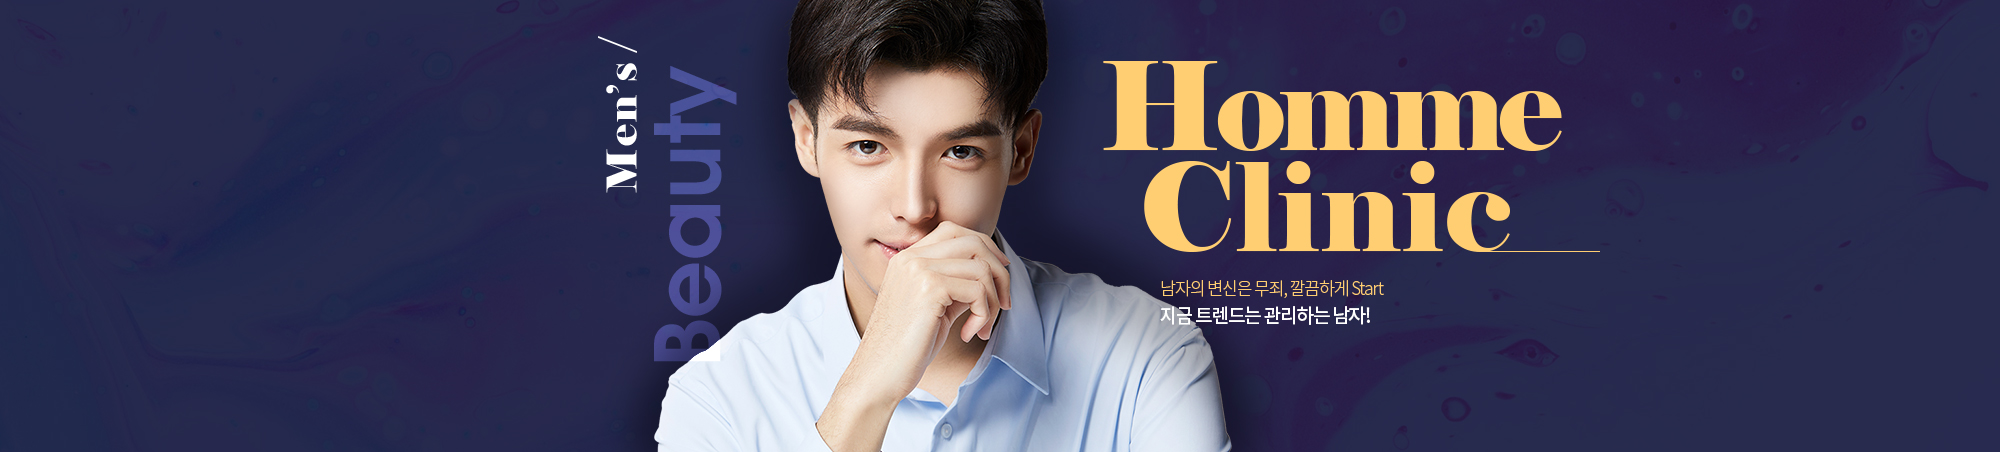 homme Clinic